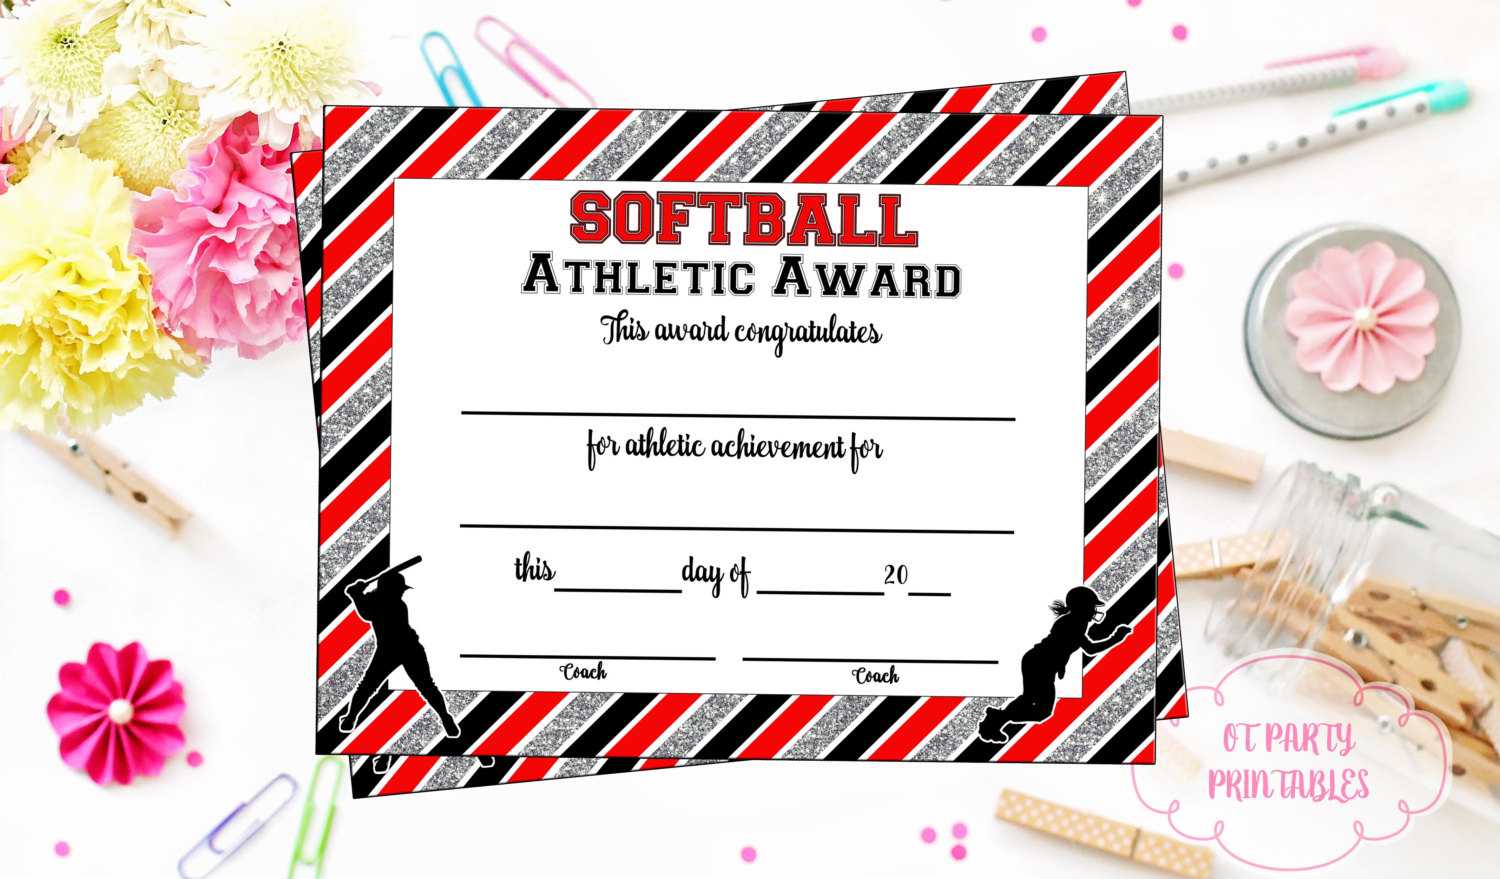 Instant Download - Softball Certificate Of Achievement - Softball Award -  Print At Home - Softball Certificate Of Completion - Sports Award Throughout Softball Certificate Templates